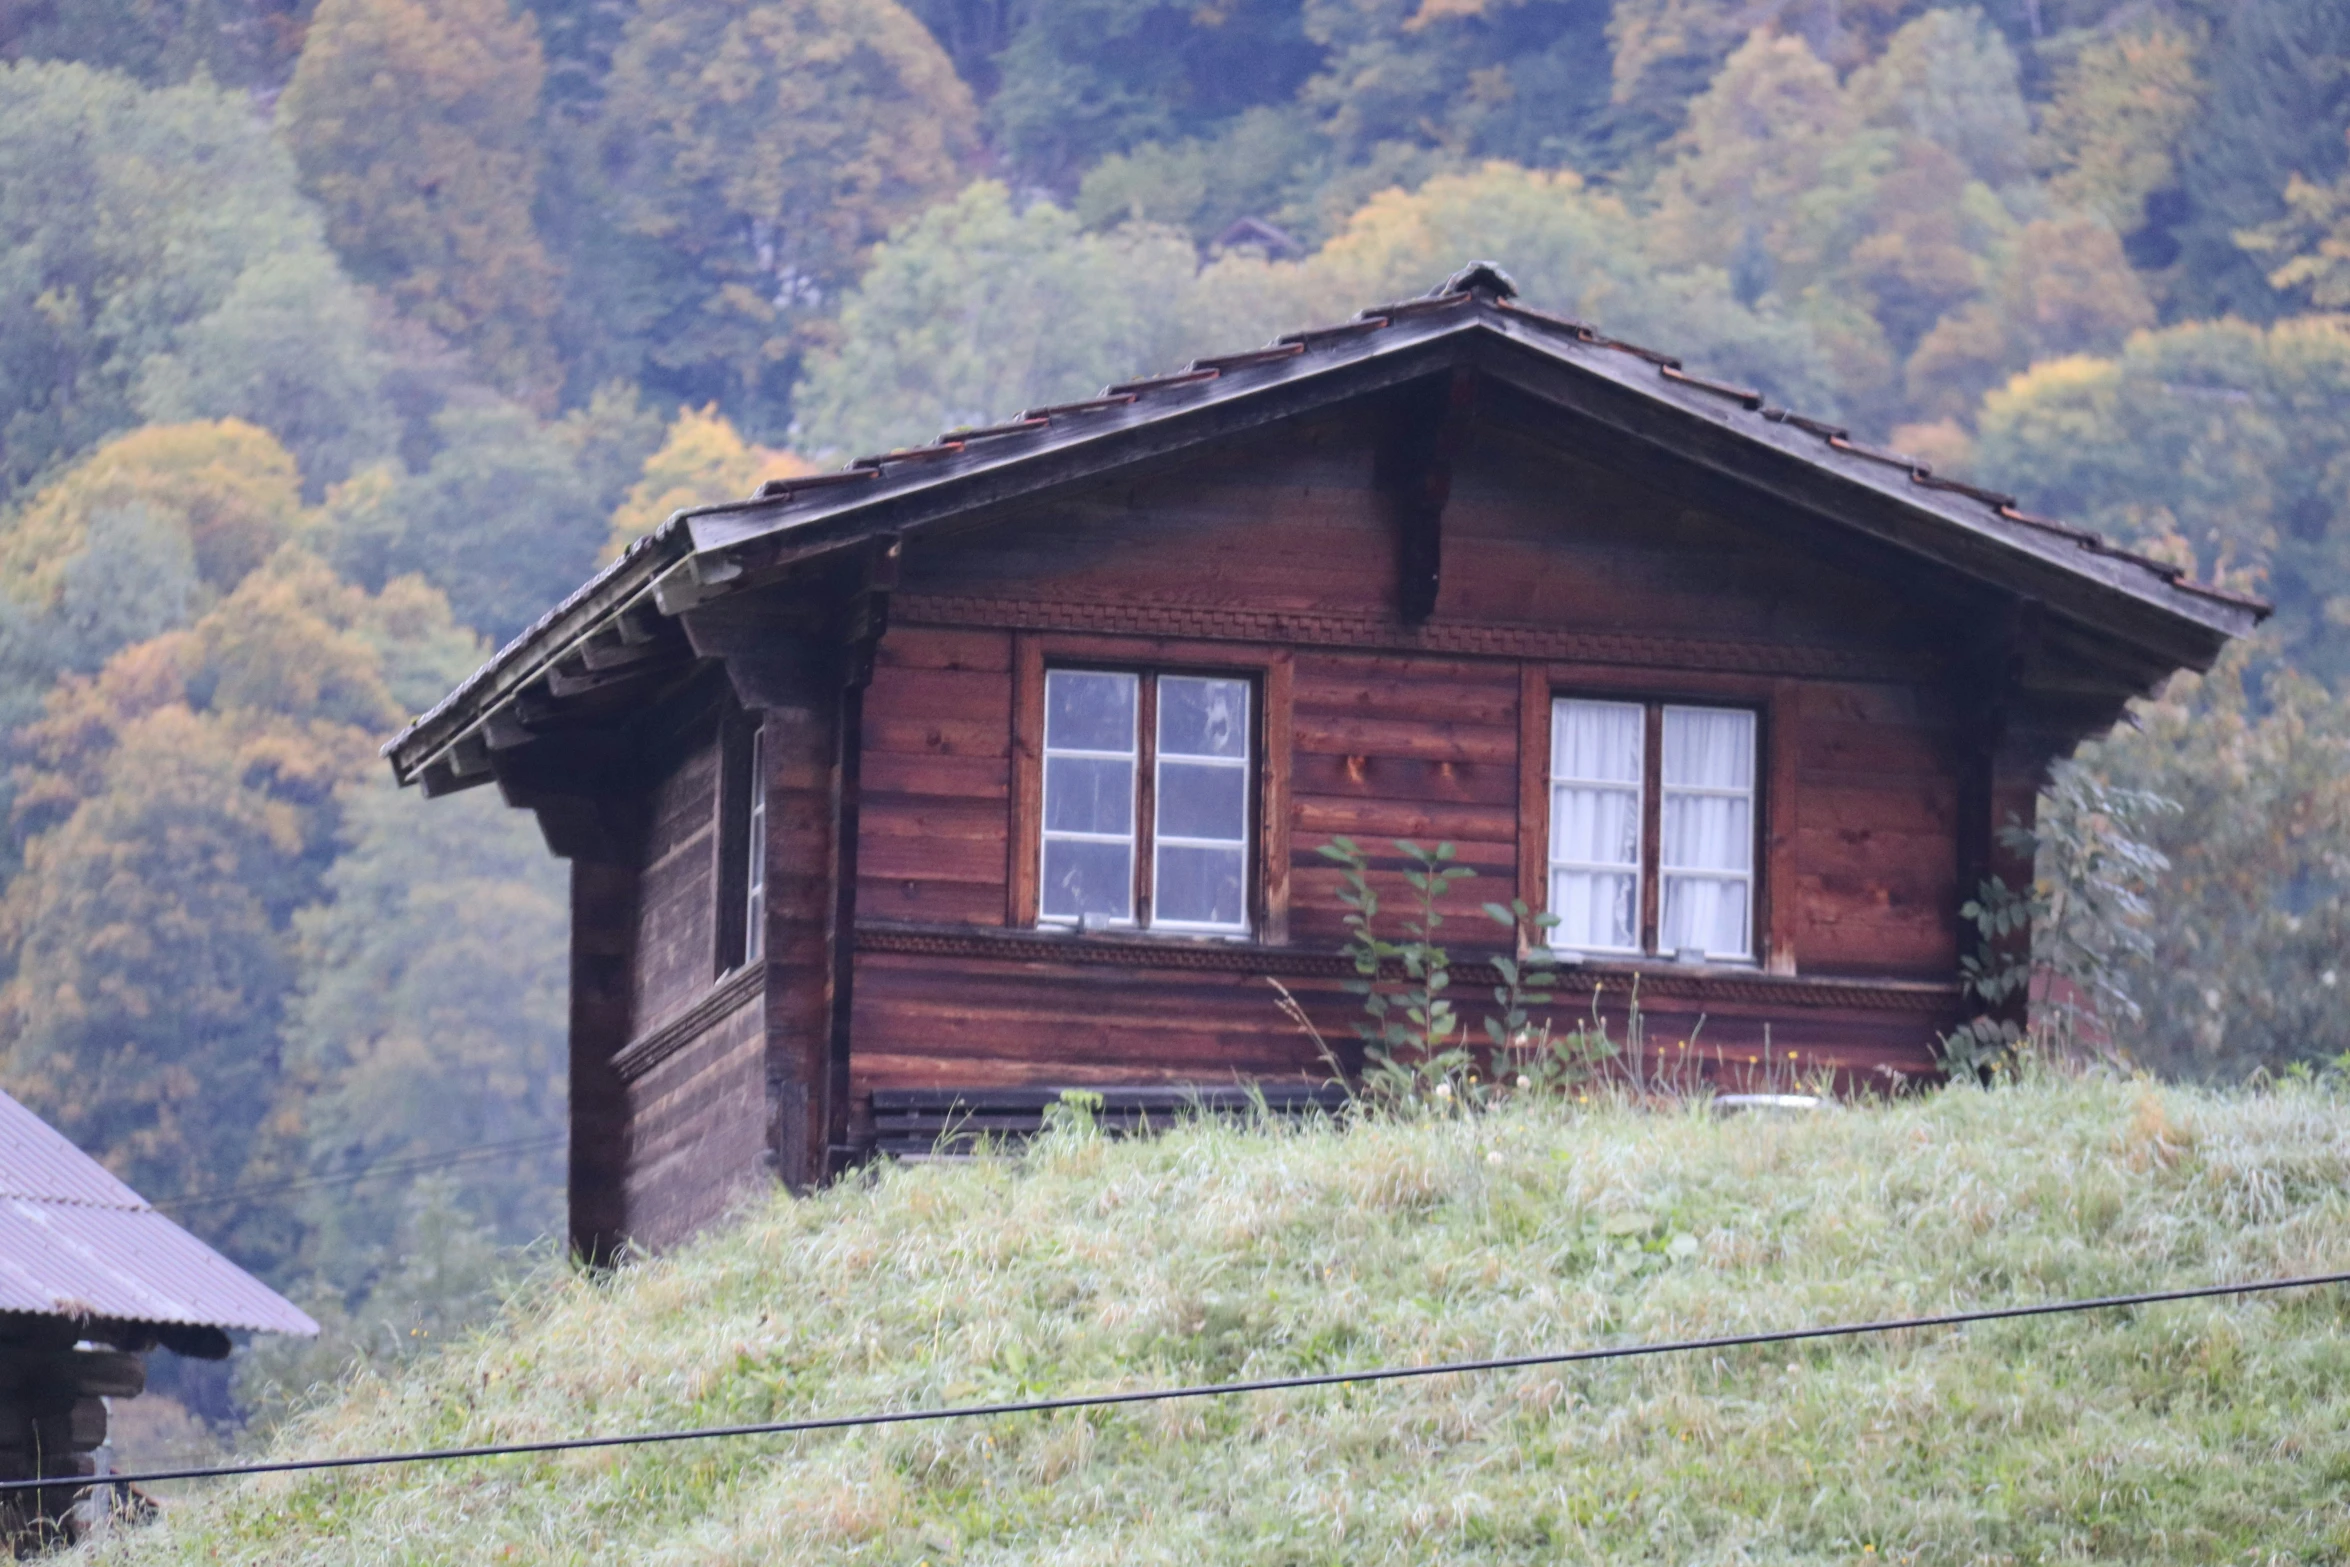 the wooden cabin is made up on a hill